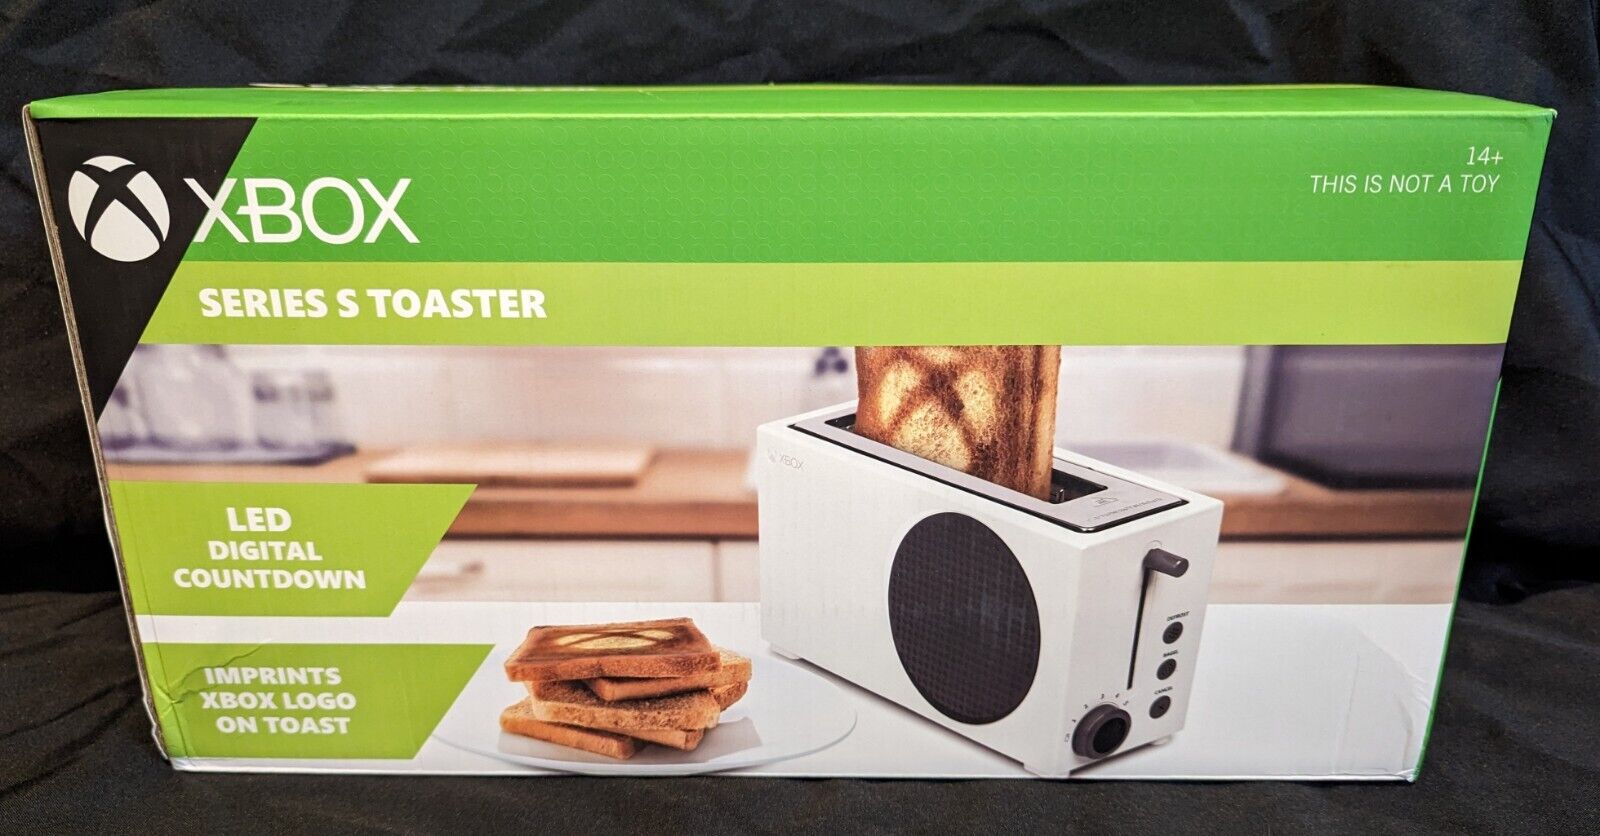 Xbox Series S Toaster Limited Edition - Imprints Xbox Logo - New & Ready to ship